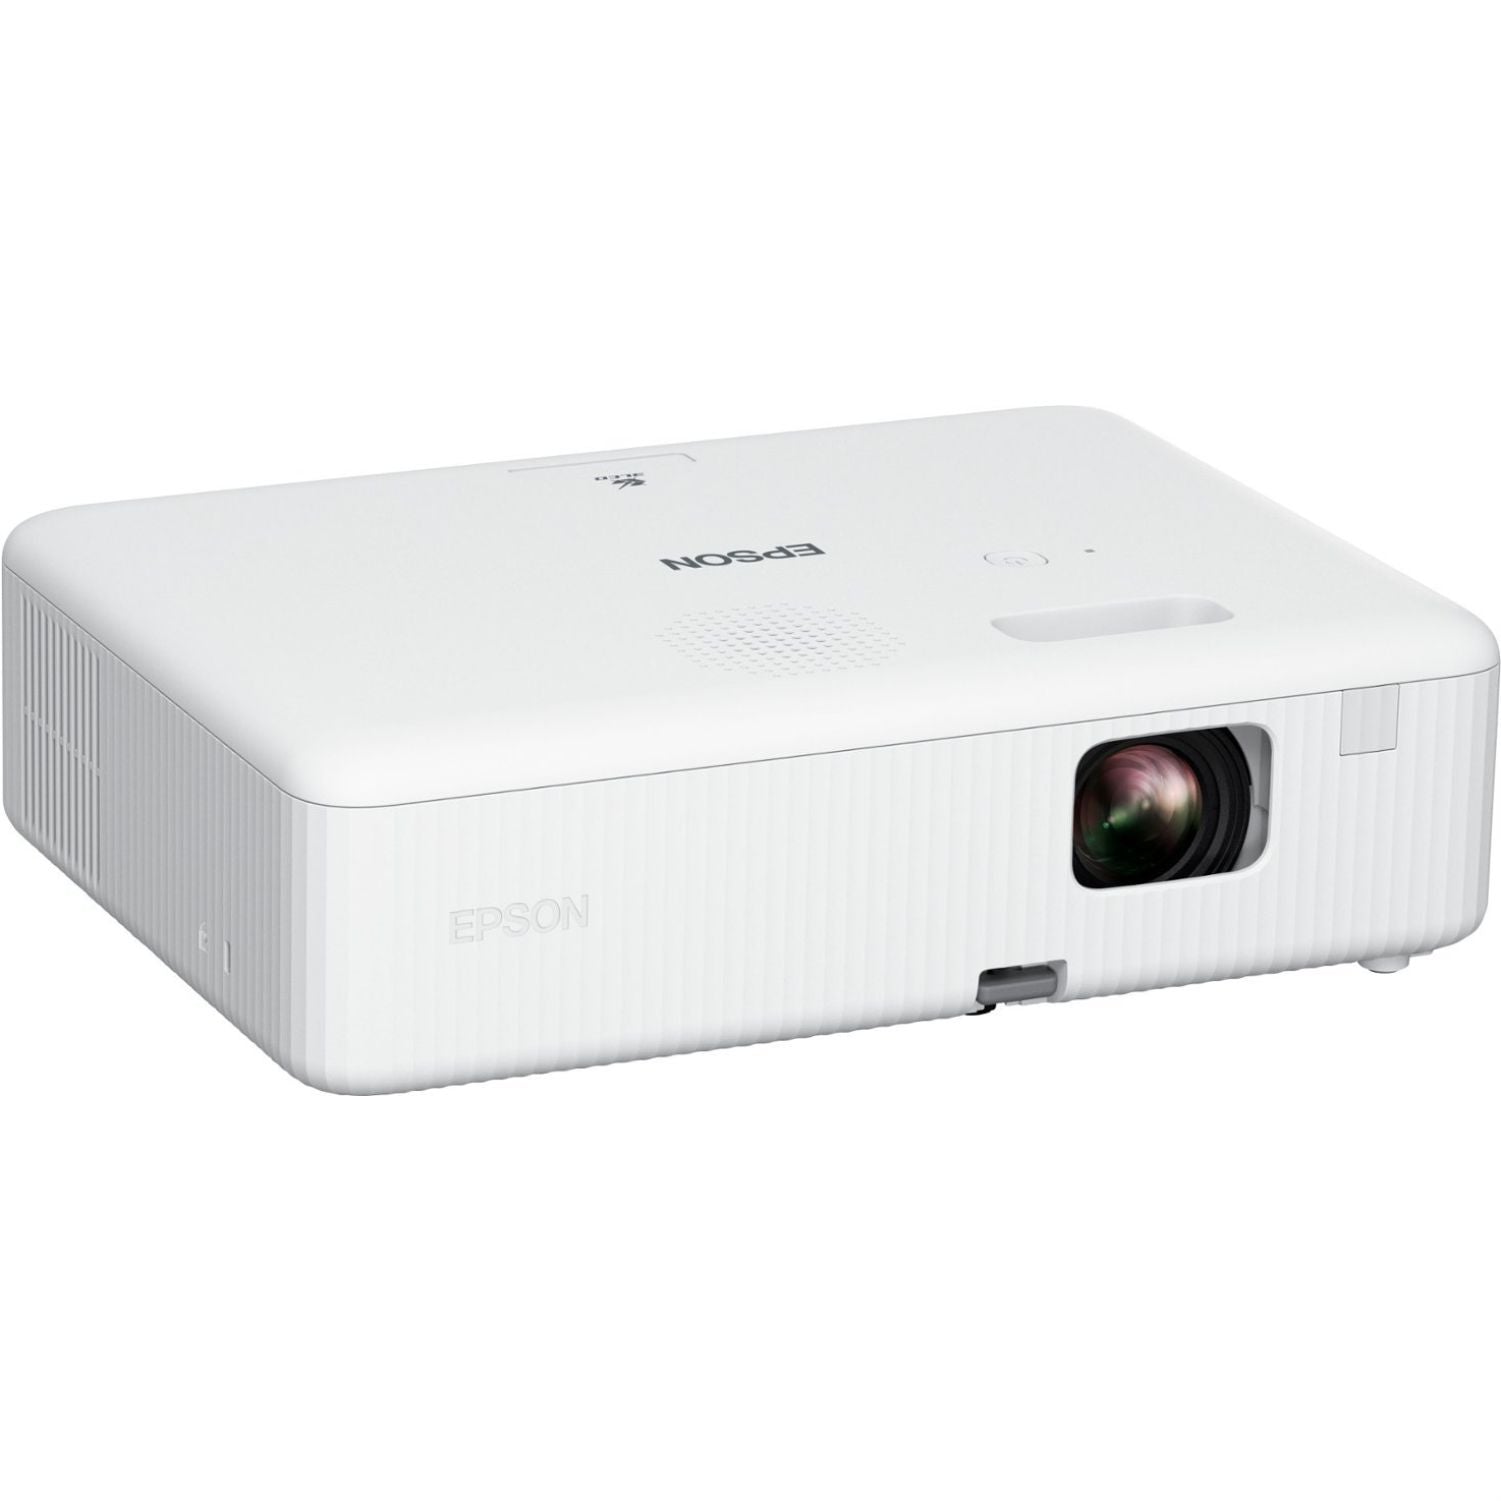 Epson EpiqVision Flex CO-W01 Portable Projector, 3-Chip 3LCD, Built-in Speaker, 300" Home Entertainment and Work - White